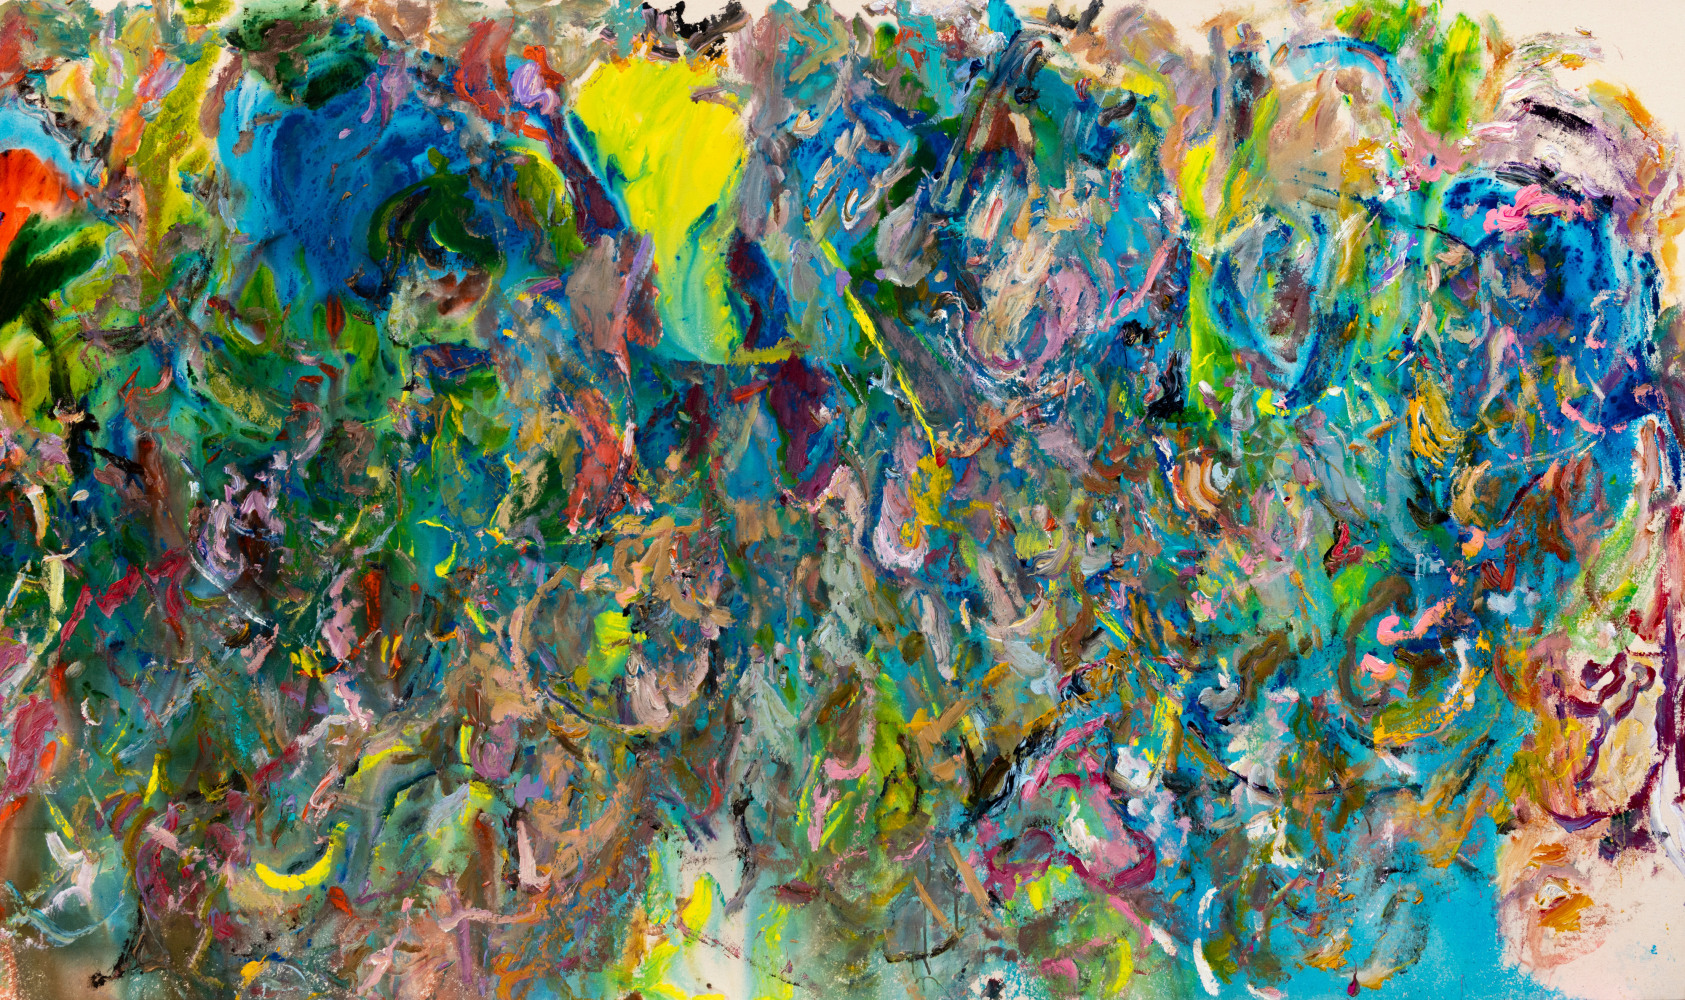 LARRY POONS (American b. 1937)

Moralee

2021

Acrylic on canvas

57 3/4 x 99 inches

146.7 x 251.5cm